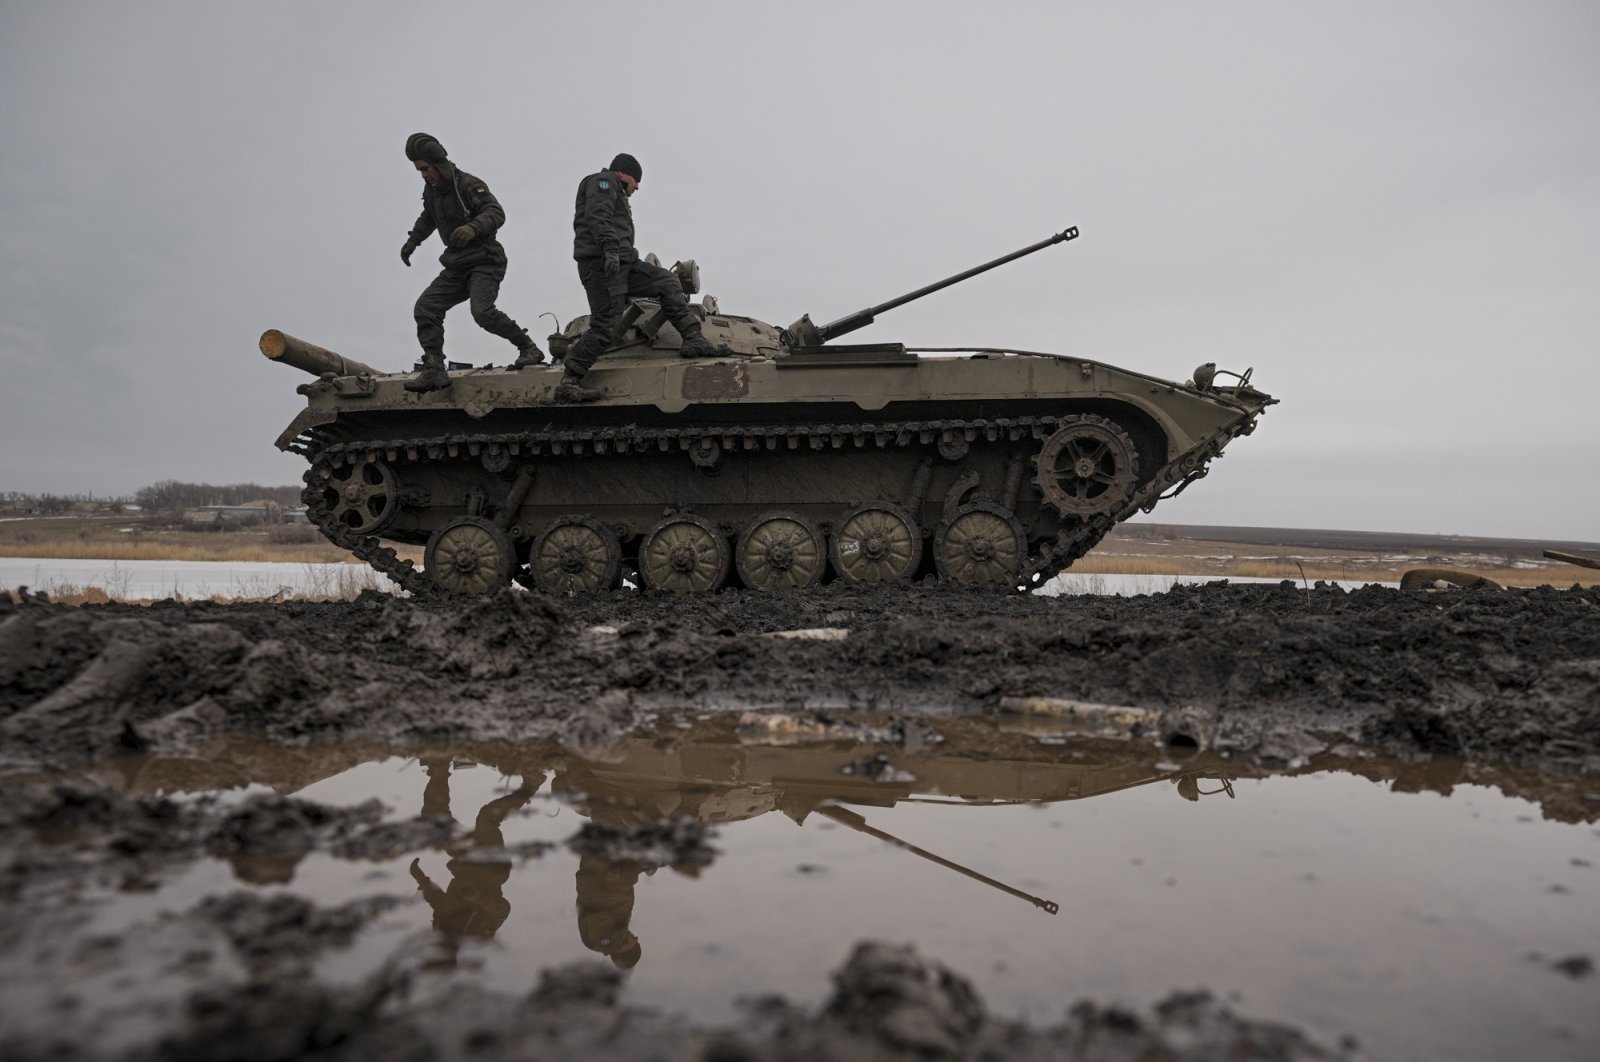 Ukrainian service officers walk on an armored vehicle during an exercise in a Joint Forces Operation-controlled area in the Donetsk region, eastern Ukraine, Feb. 10, 2022. (AP Photo)